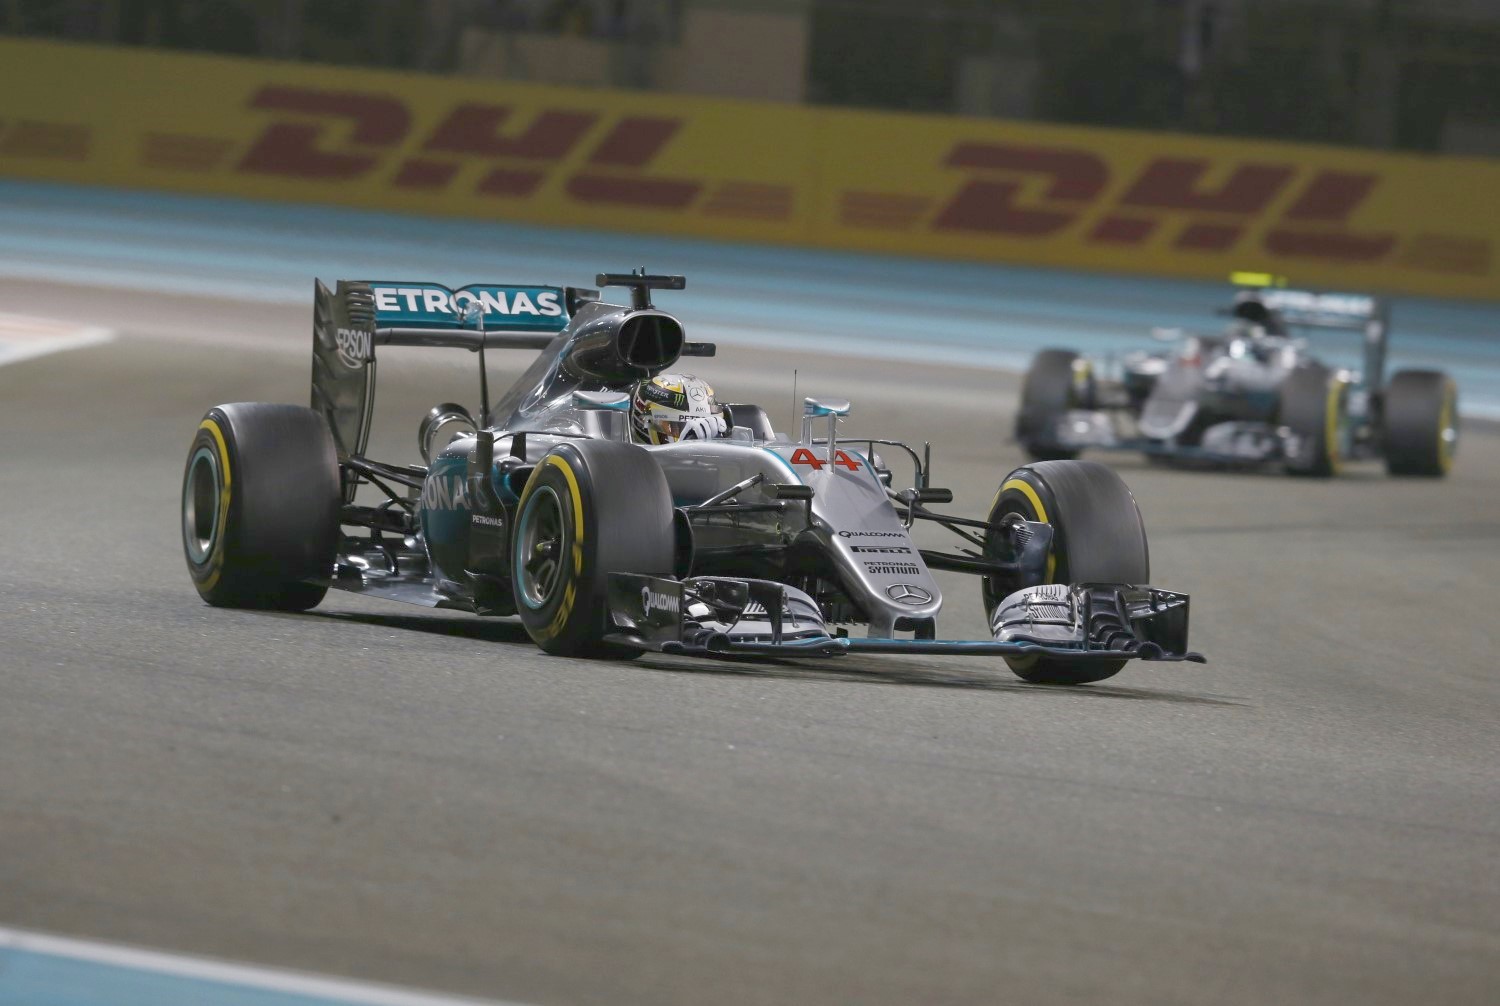 Rosberg was unsure how far Hamilton would take it. Rosberg could have rammed Hamilton, taken them both out, and been assured the title.  He took the high road.